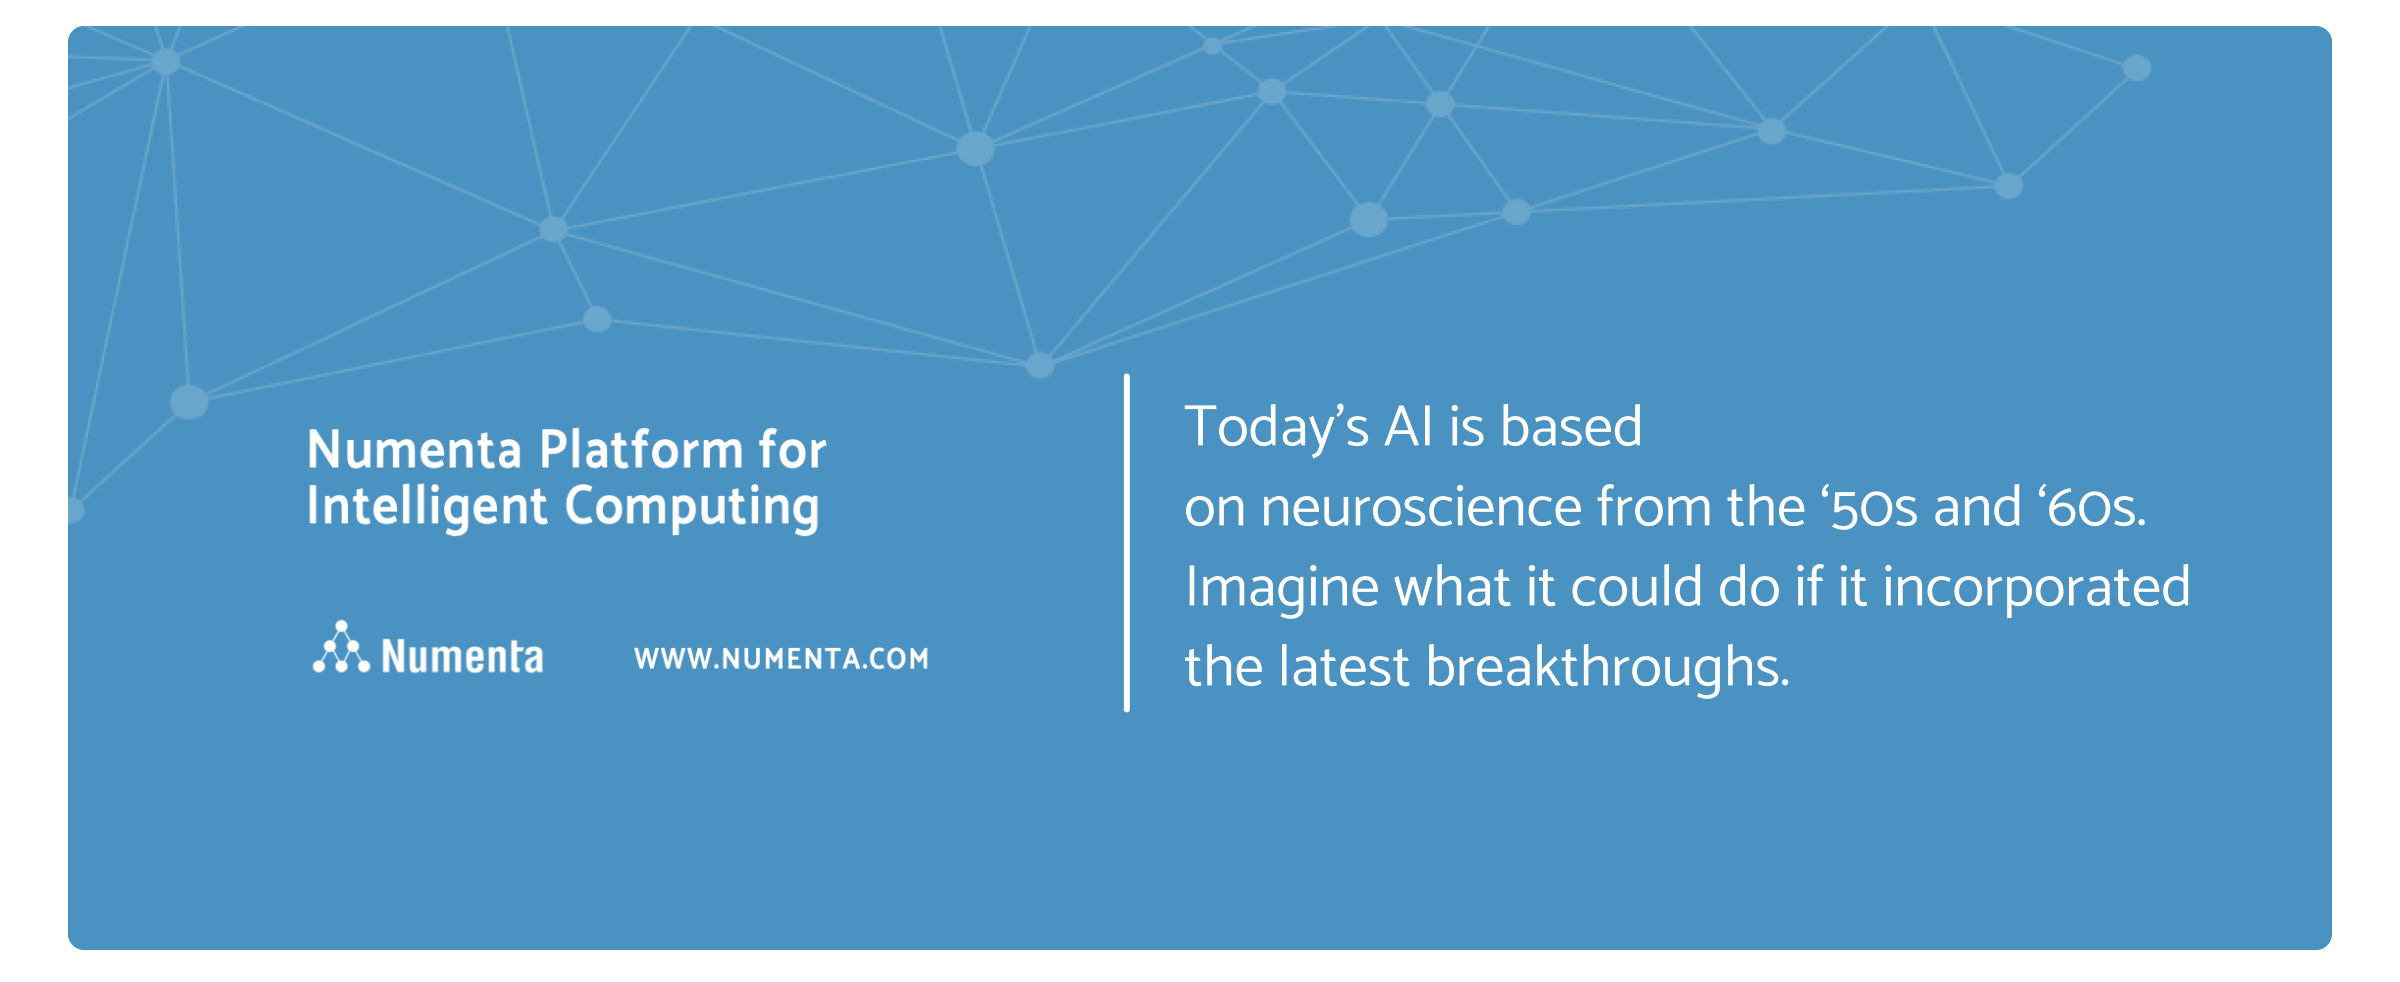 Image showing numenta's identity. Today’s AI is based on neuroscience from the ‘50s and ‘60s. Imagine what it could do if it incorporated the lates break-throughs.